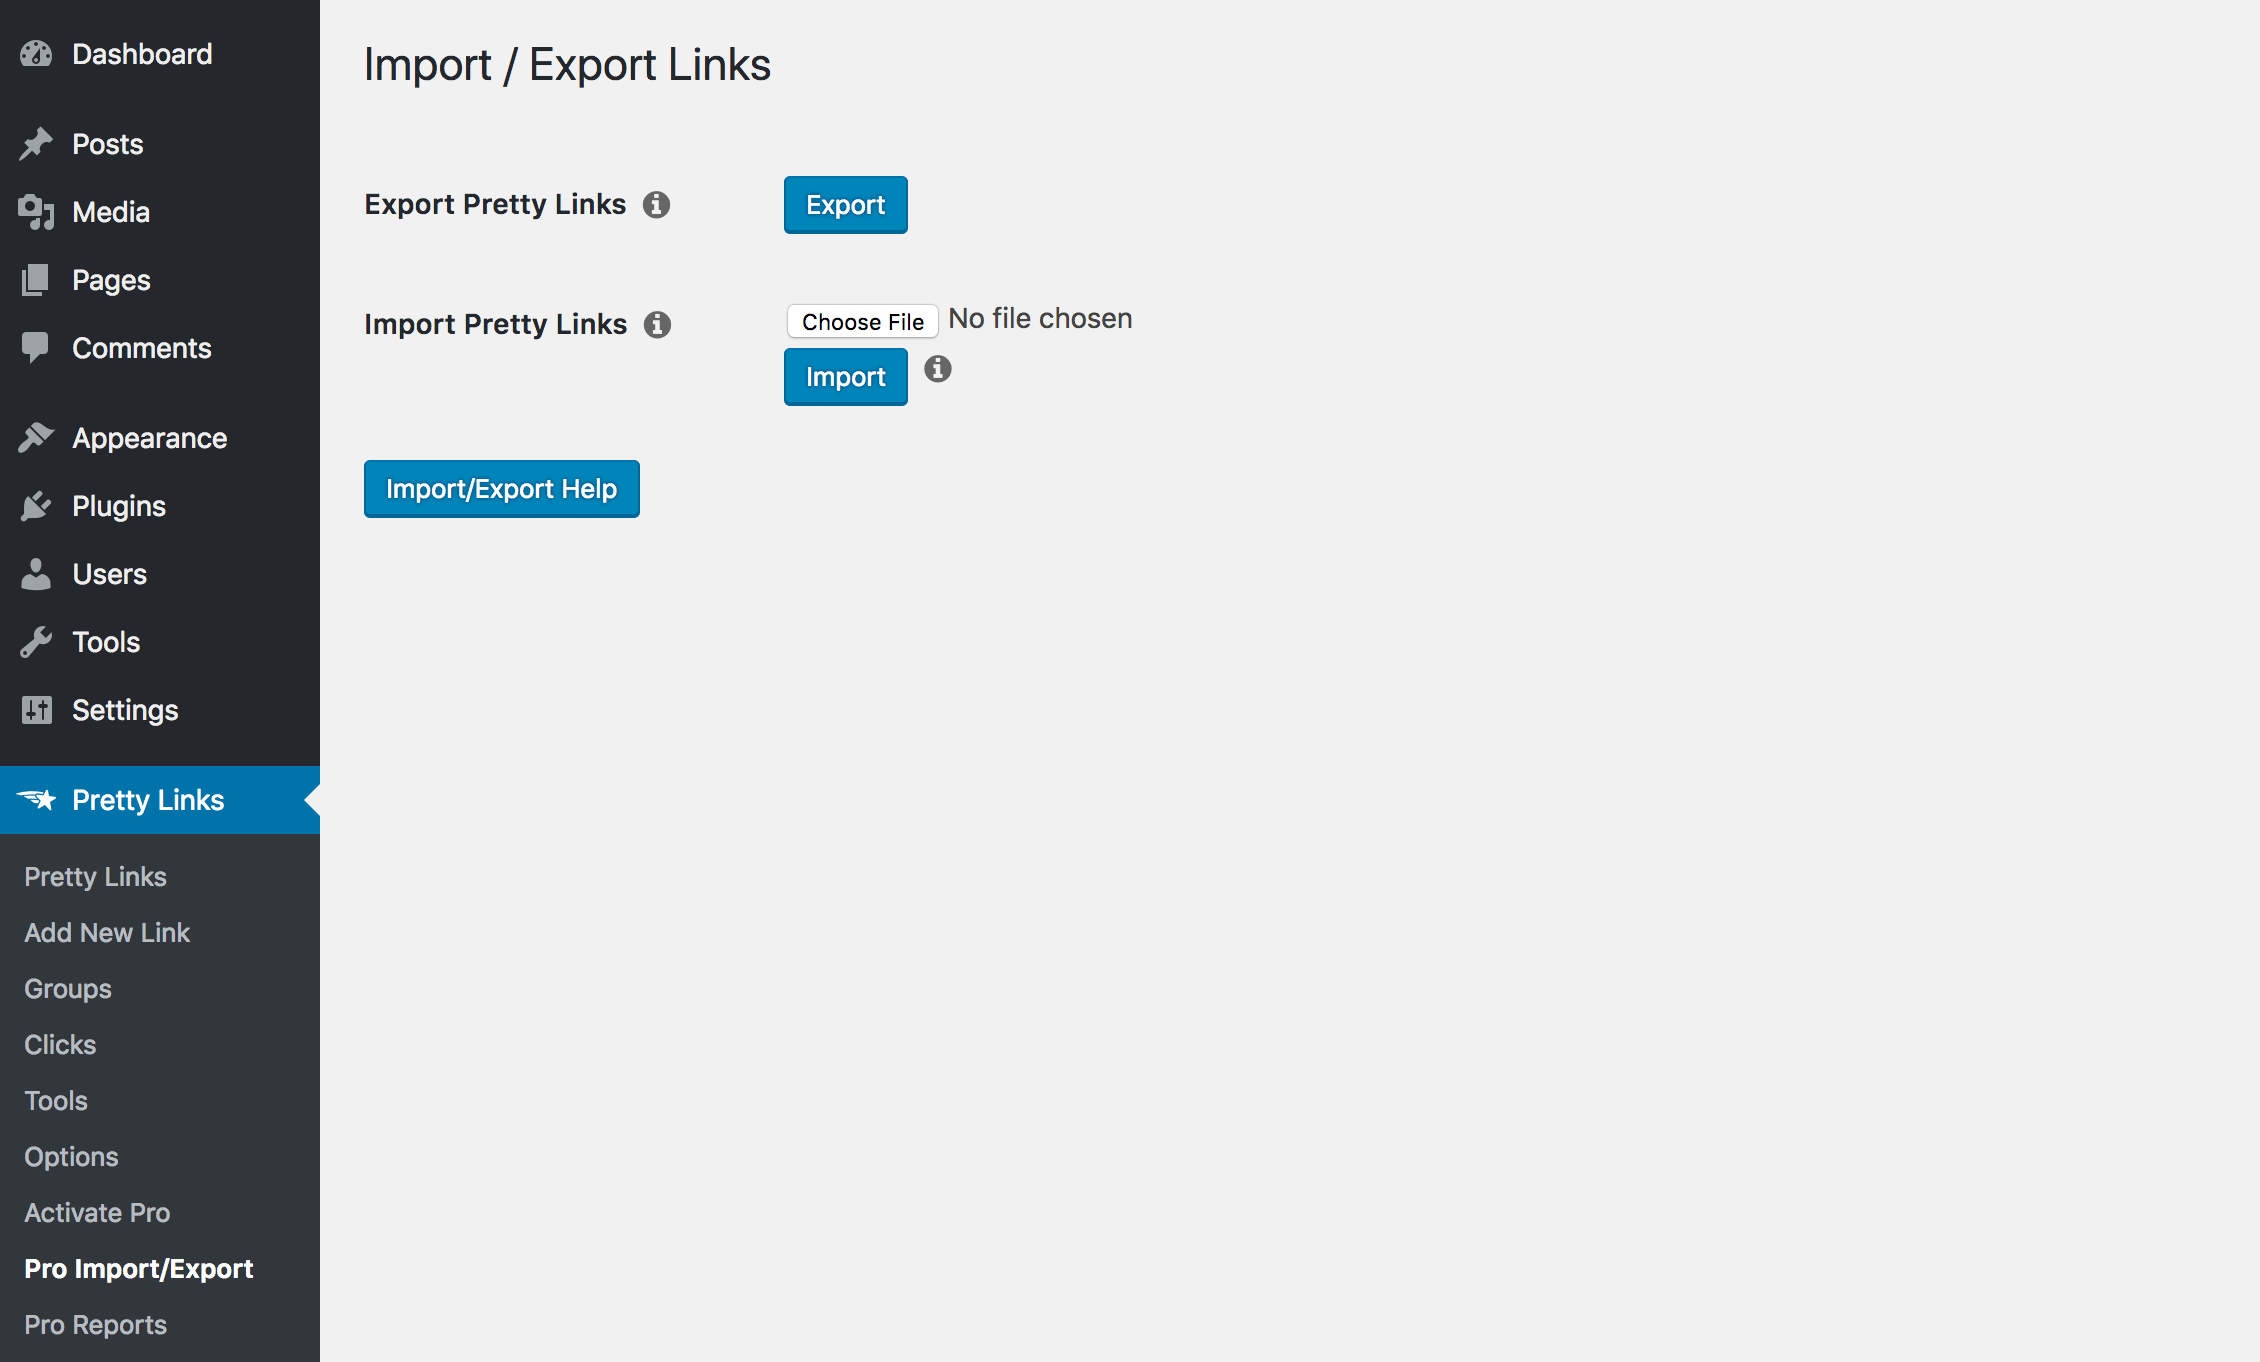 The Pro Import/Export page in Pretty Links.